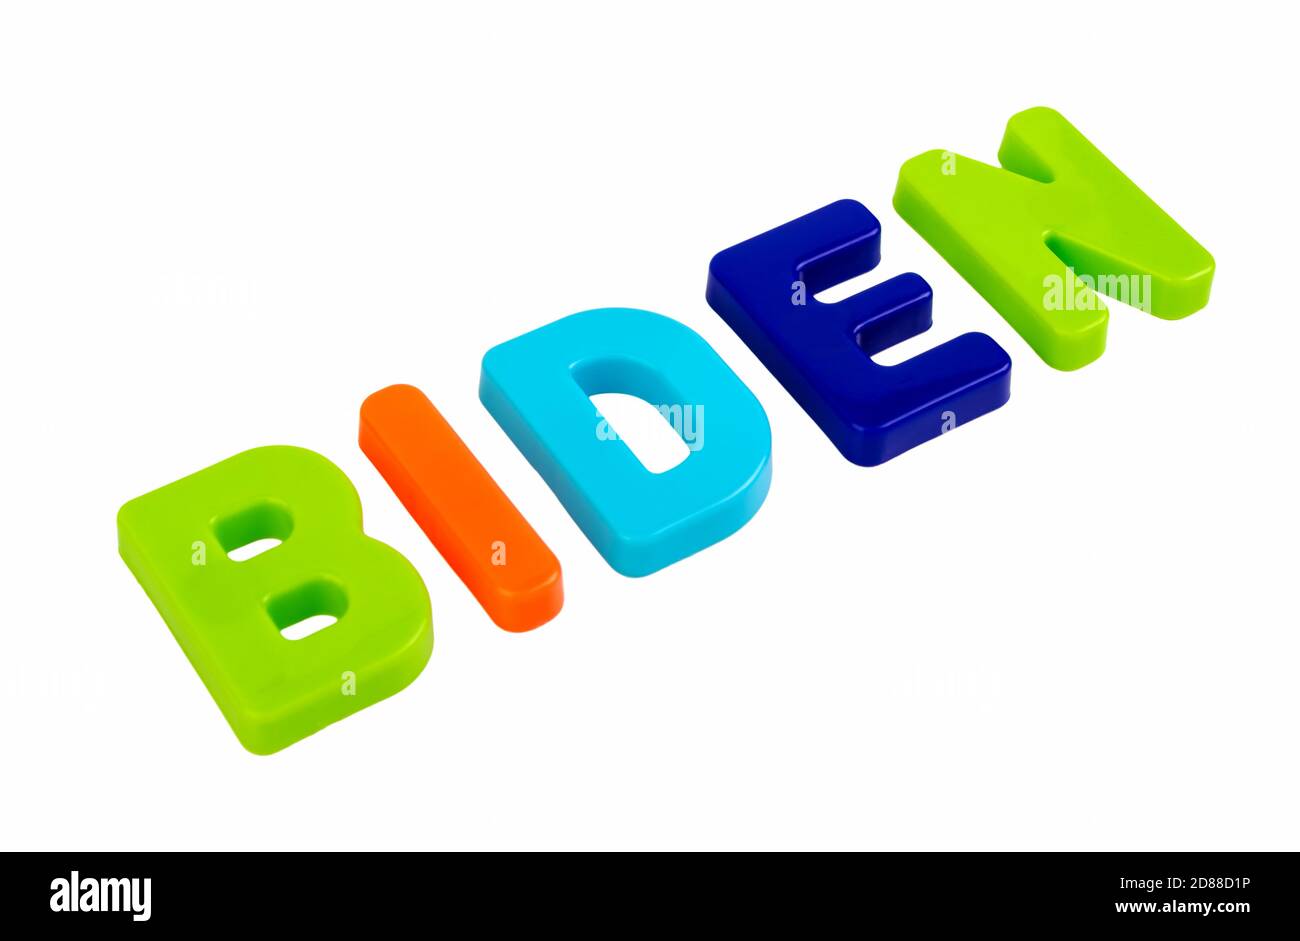 US presidential candidate Joseph Biden last name written in multicolored plastic letters on a white background. Concept for the electoral campaign. Stock Photo